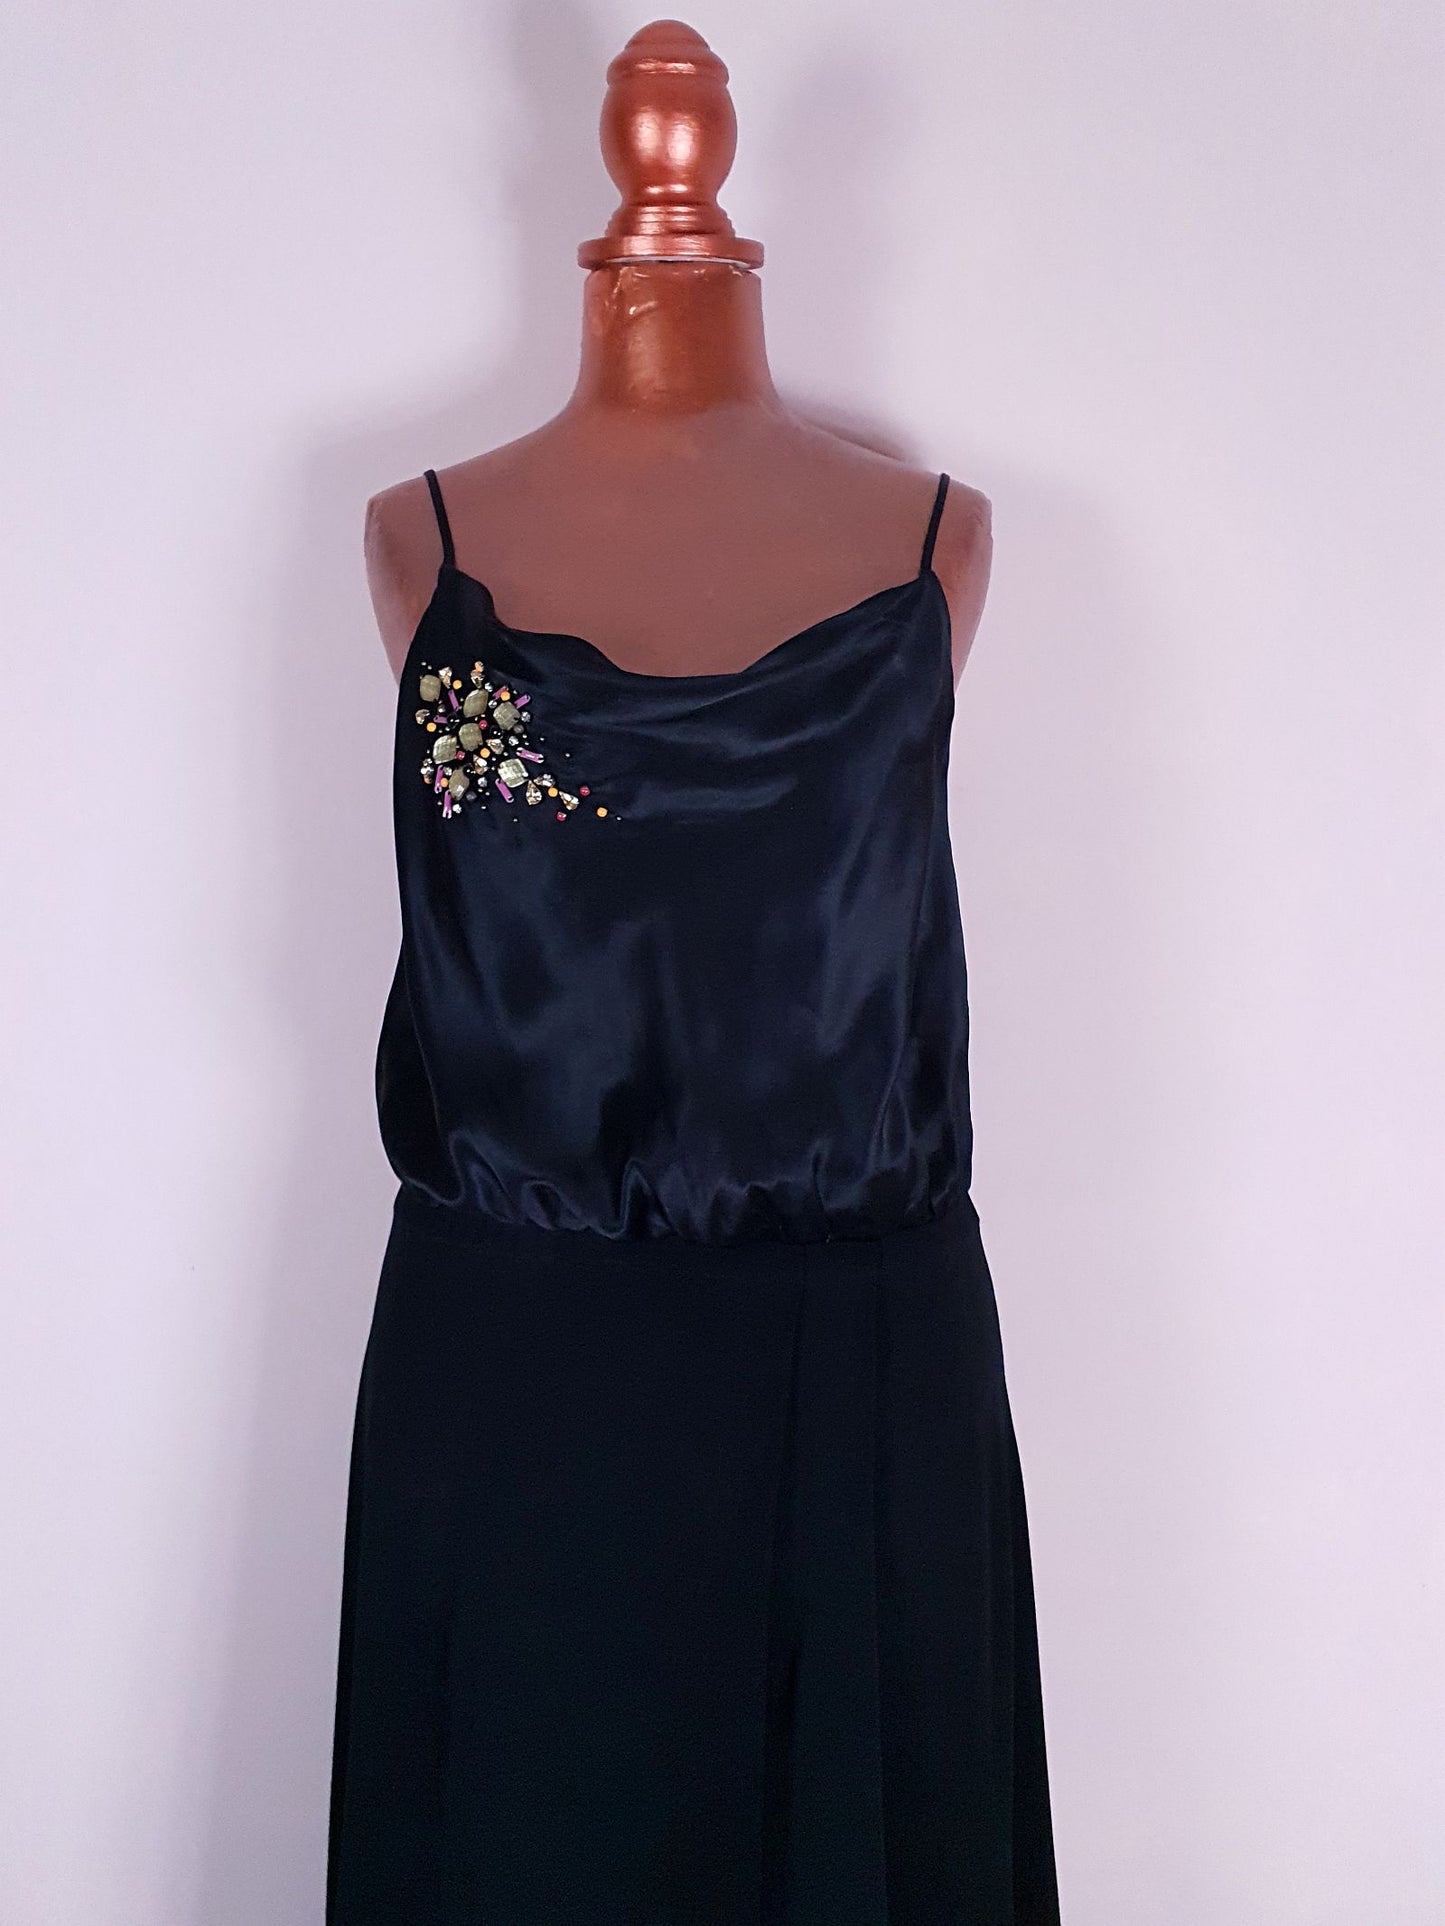 Black Silk Sequin Dress Evening Gown Maxi Party - Size 8